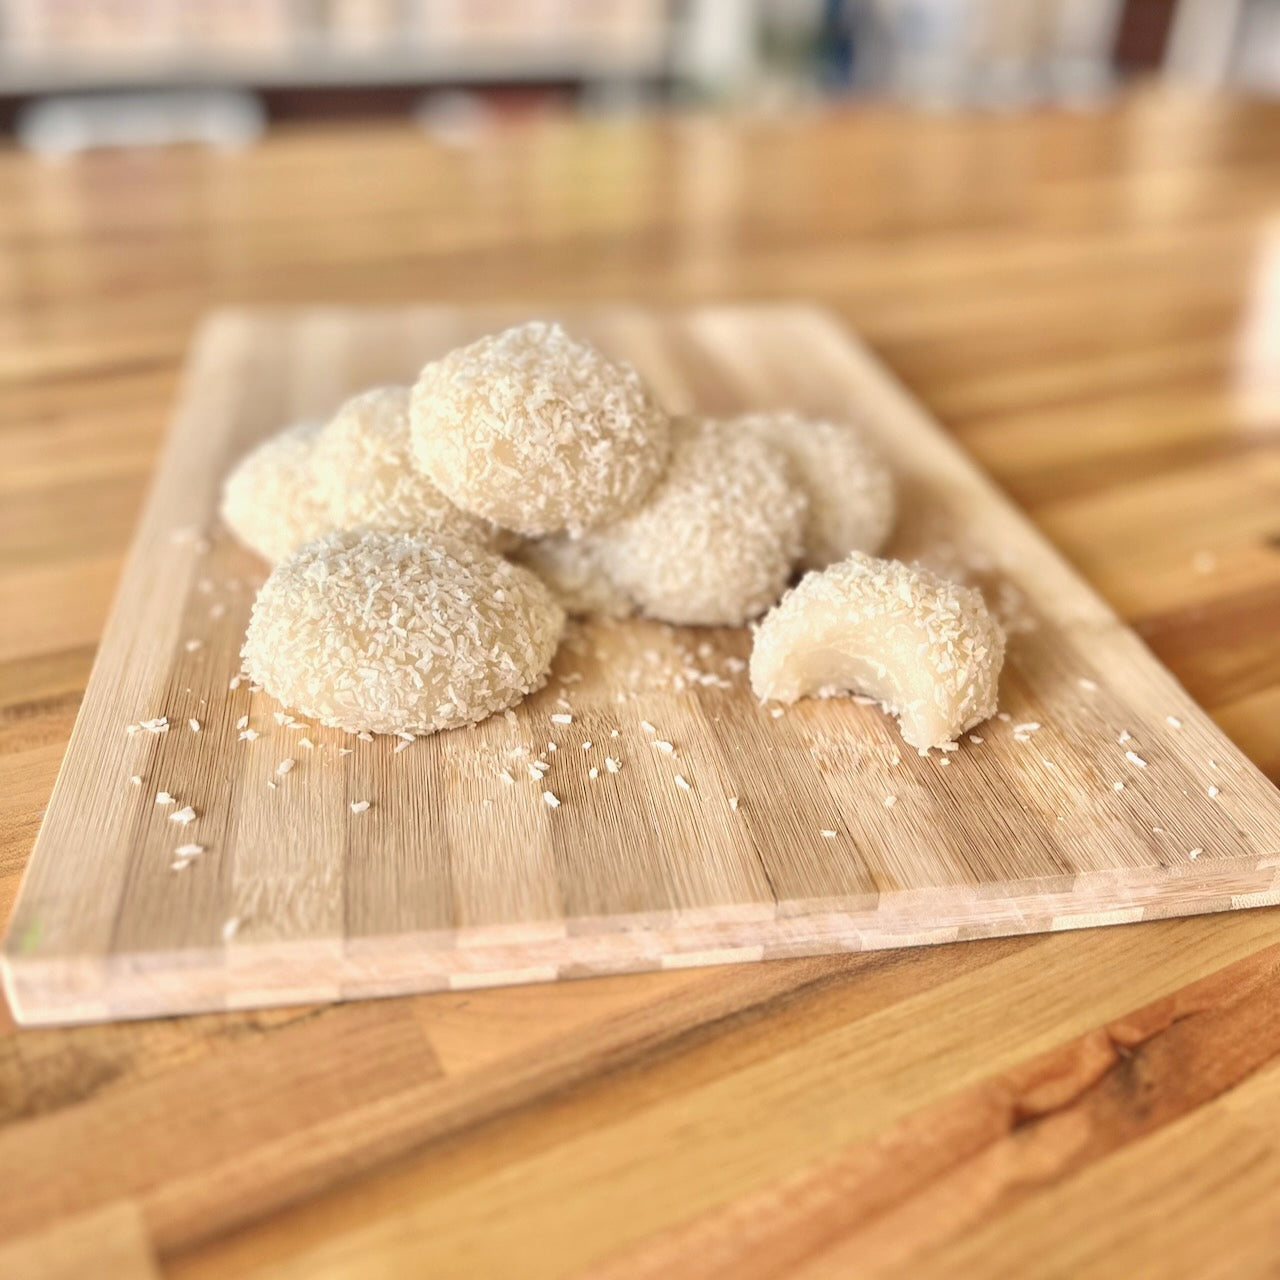 Strawberry Mochi – The Works Seattle